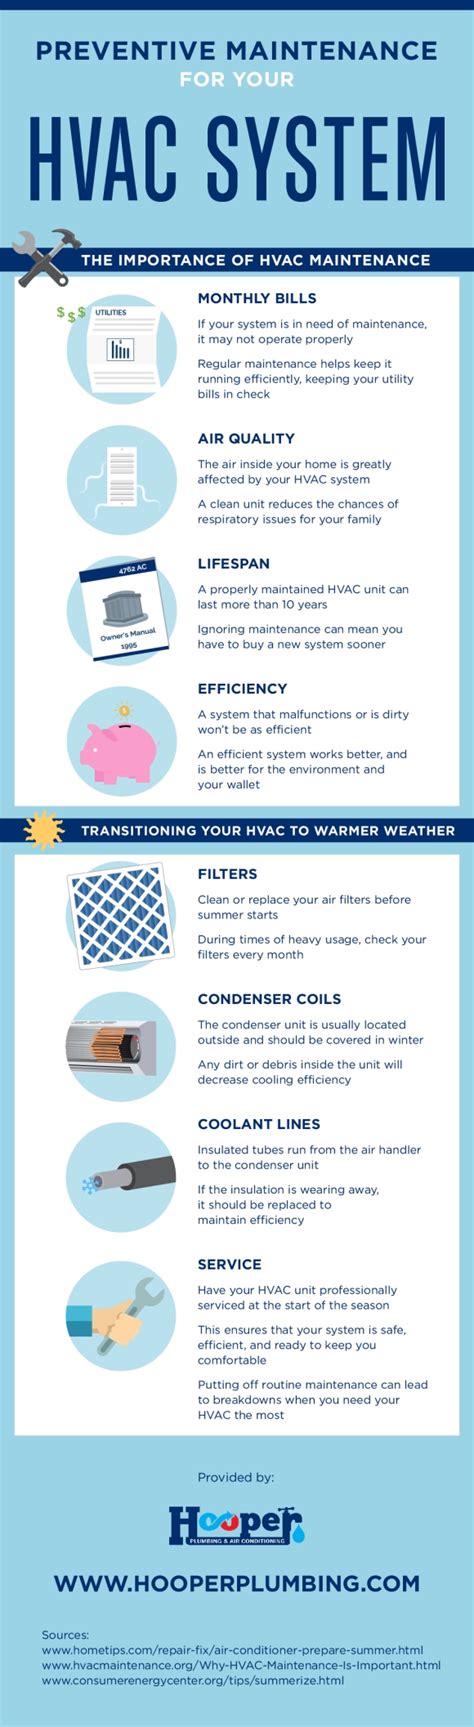 Preventive Maintenance For Your Hvac System Infographic Hooper